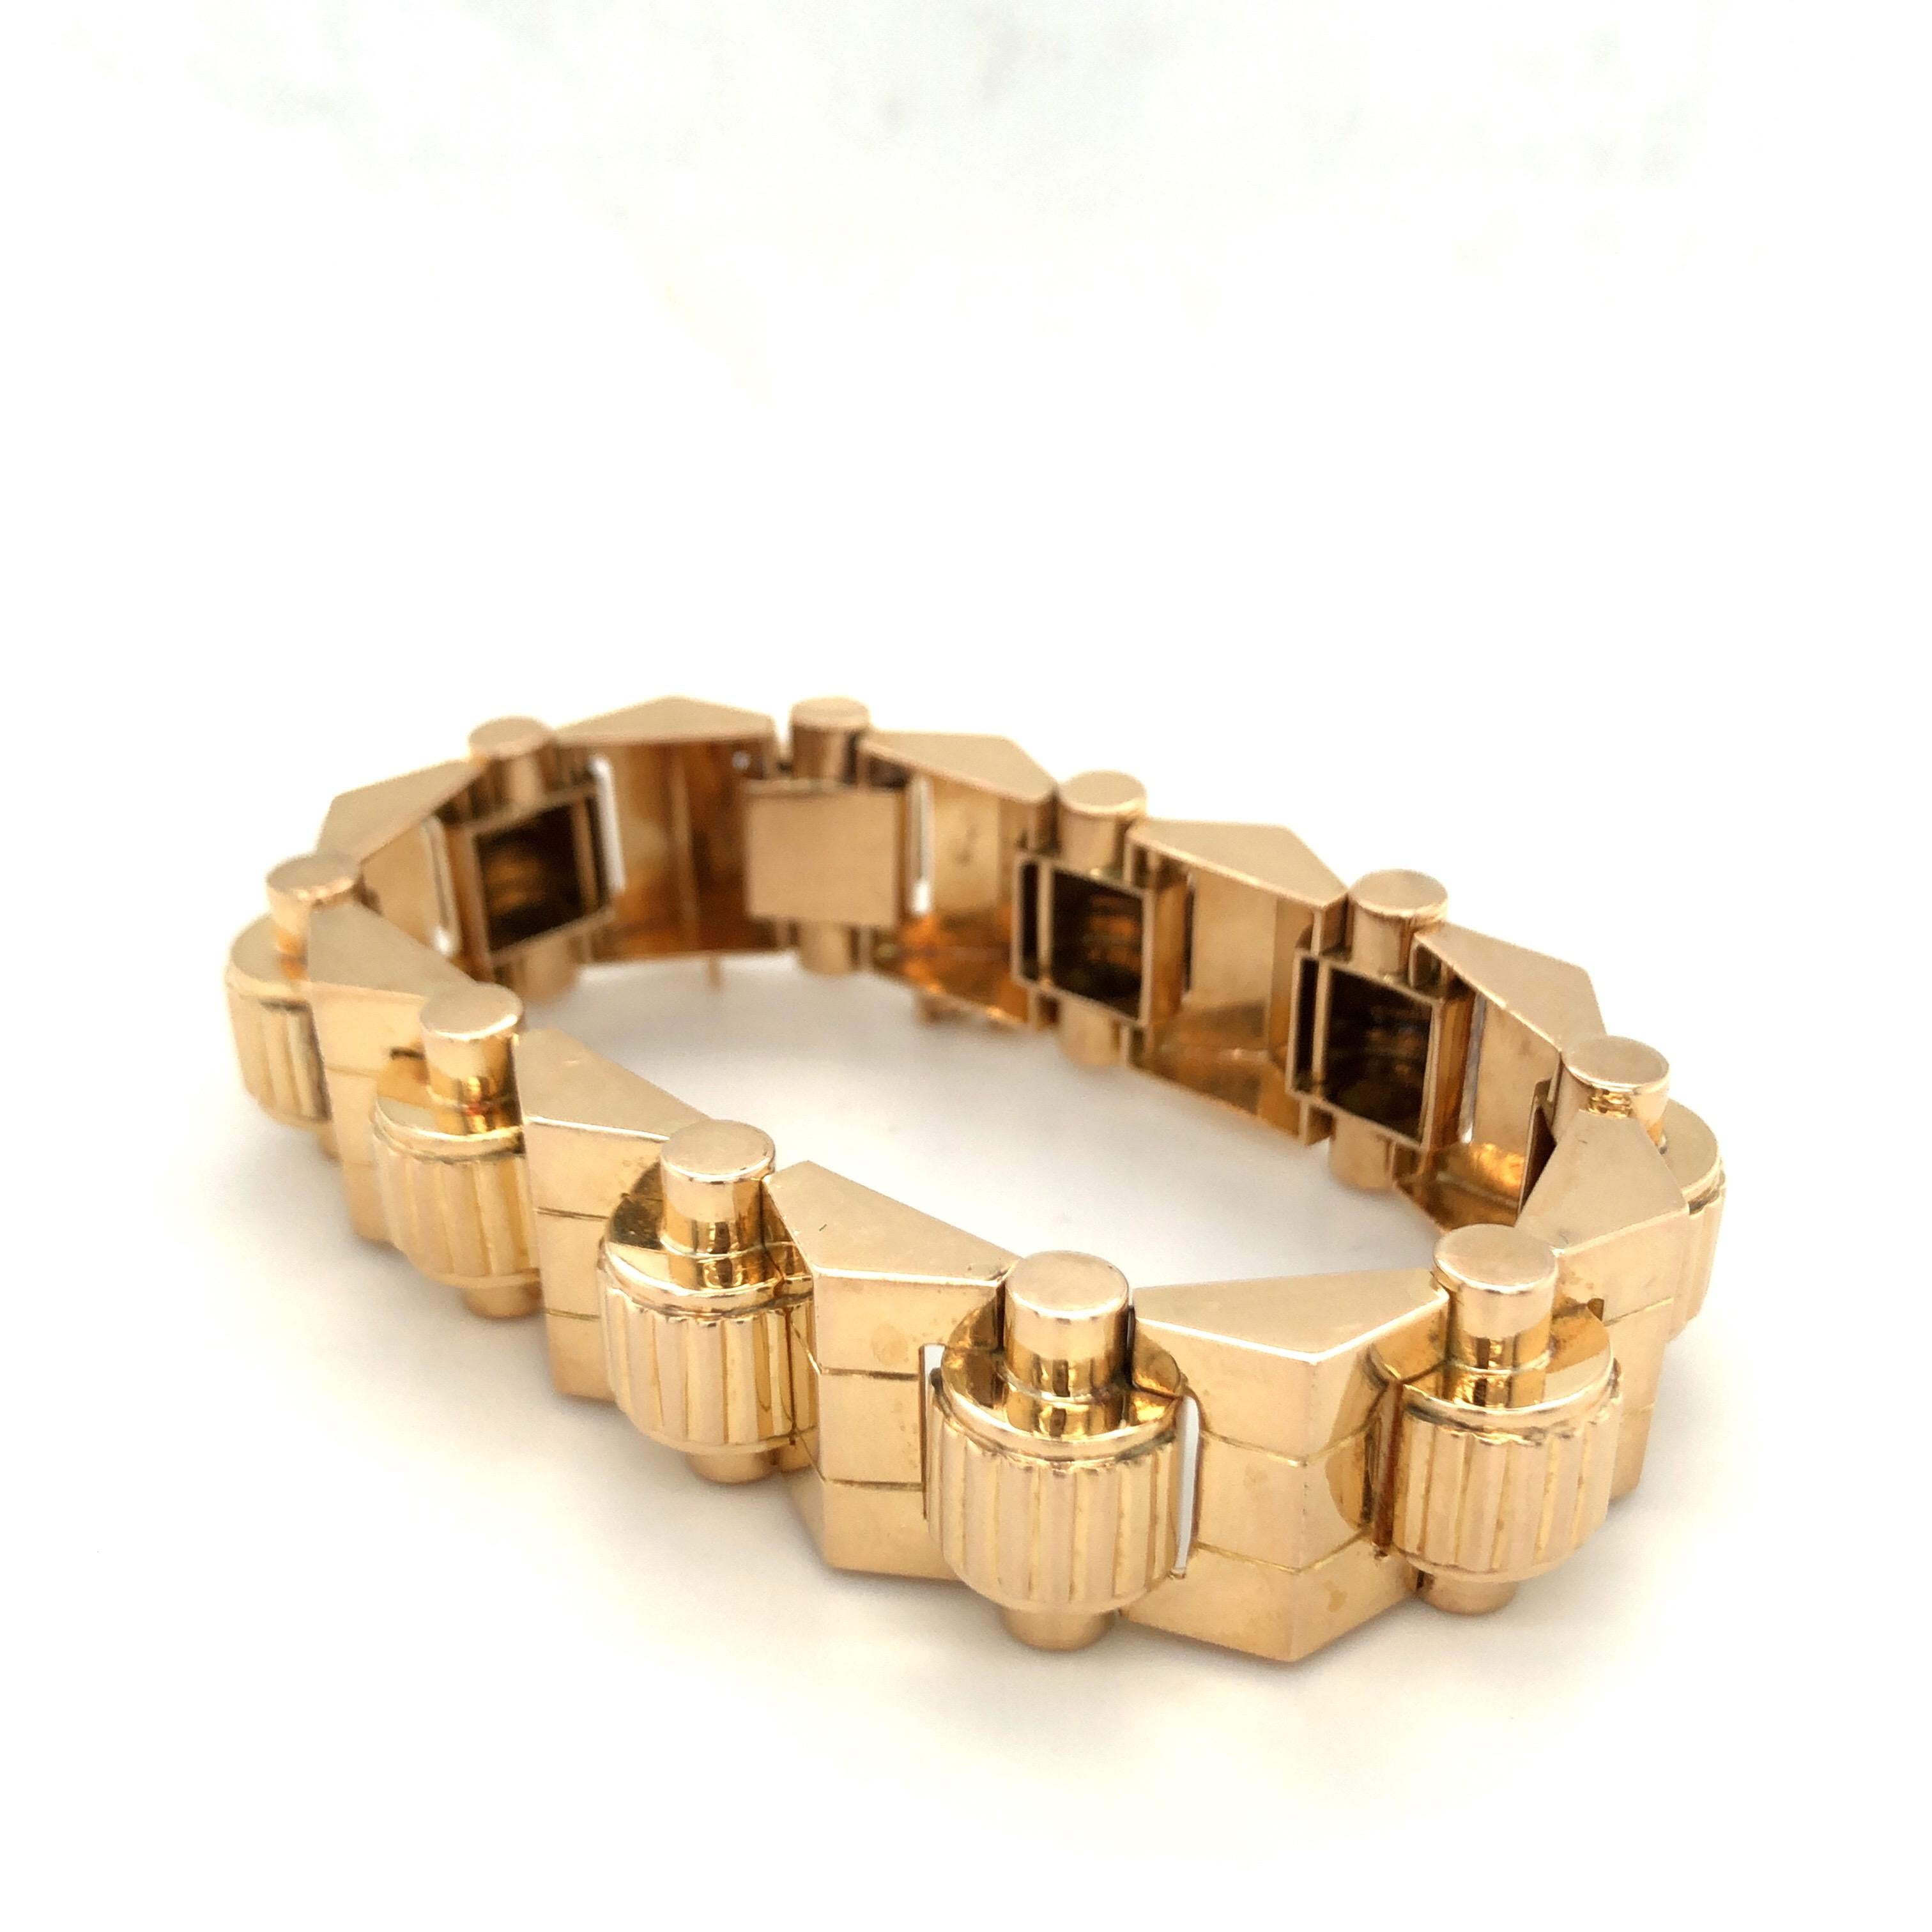 Fabulous 18 karat yellow gold retro machine age French tank bracelet, circa 1945.
Articulated geometric gold band composed of pyramidal and tubular panels with reeded details. The clasp of the bracelet is disguised seamlessly within the final link